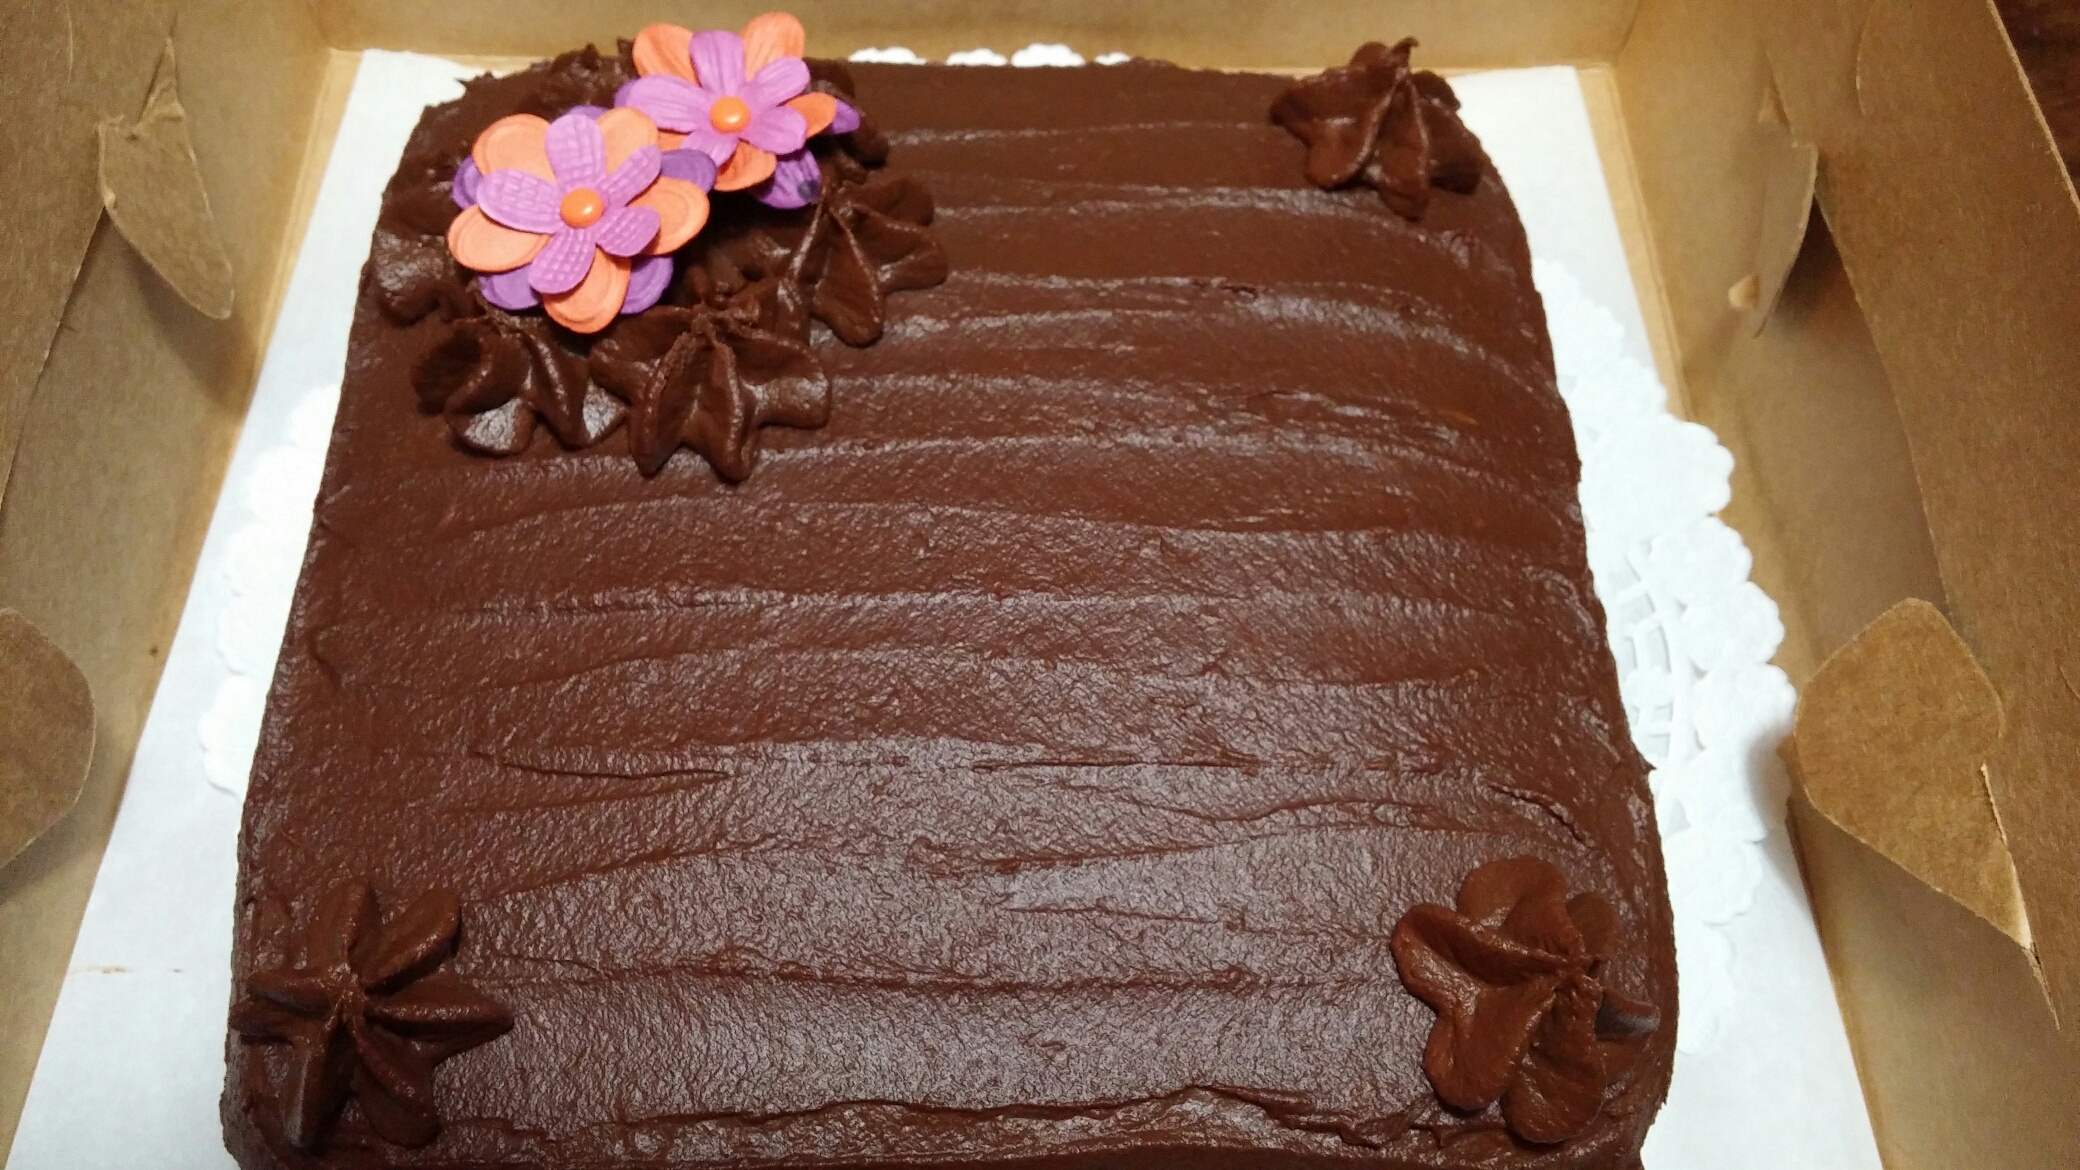 Chocolate cake with chocolate icing. Naturally Dairy free.  Vegan also available for banana or carrot cake with chocolate icing
Gluten free available in all flavors (non certified)